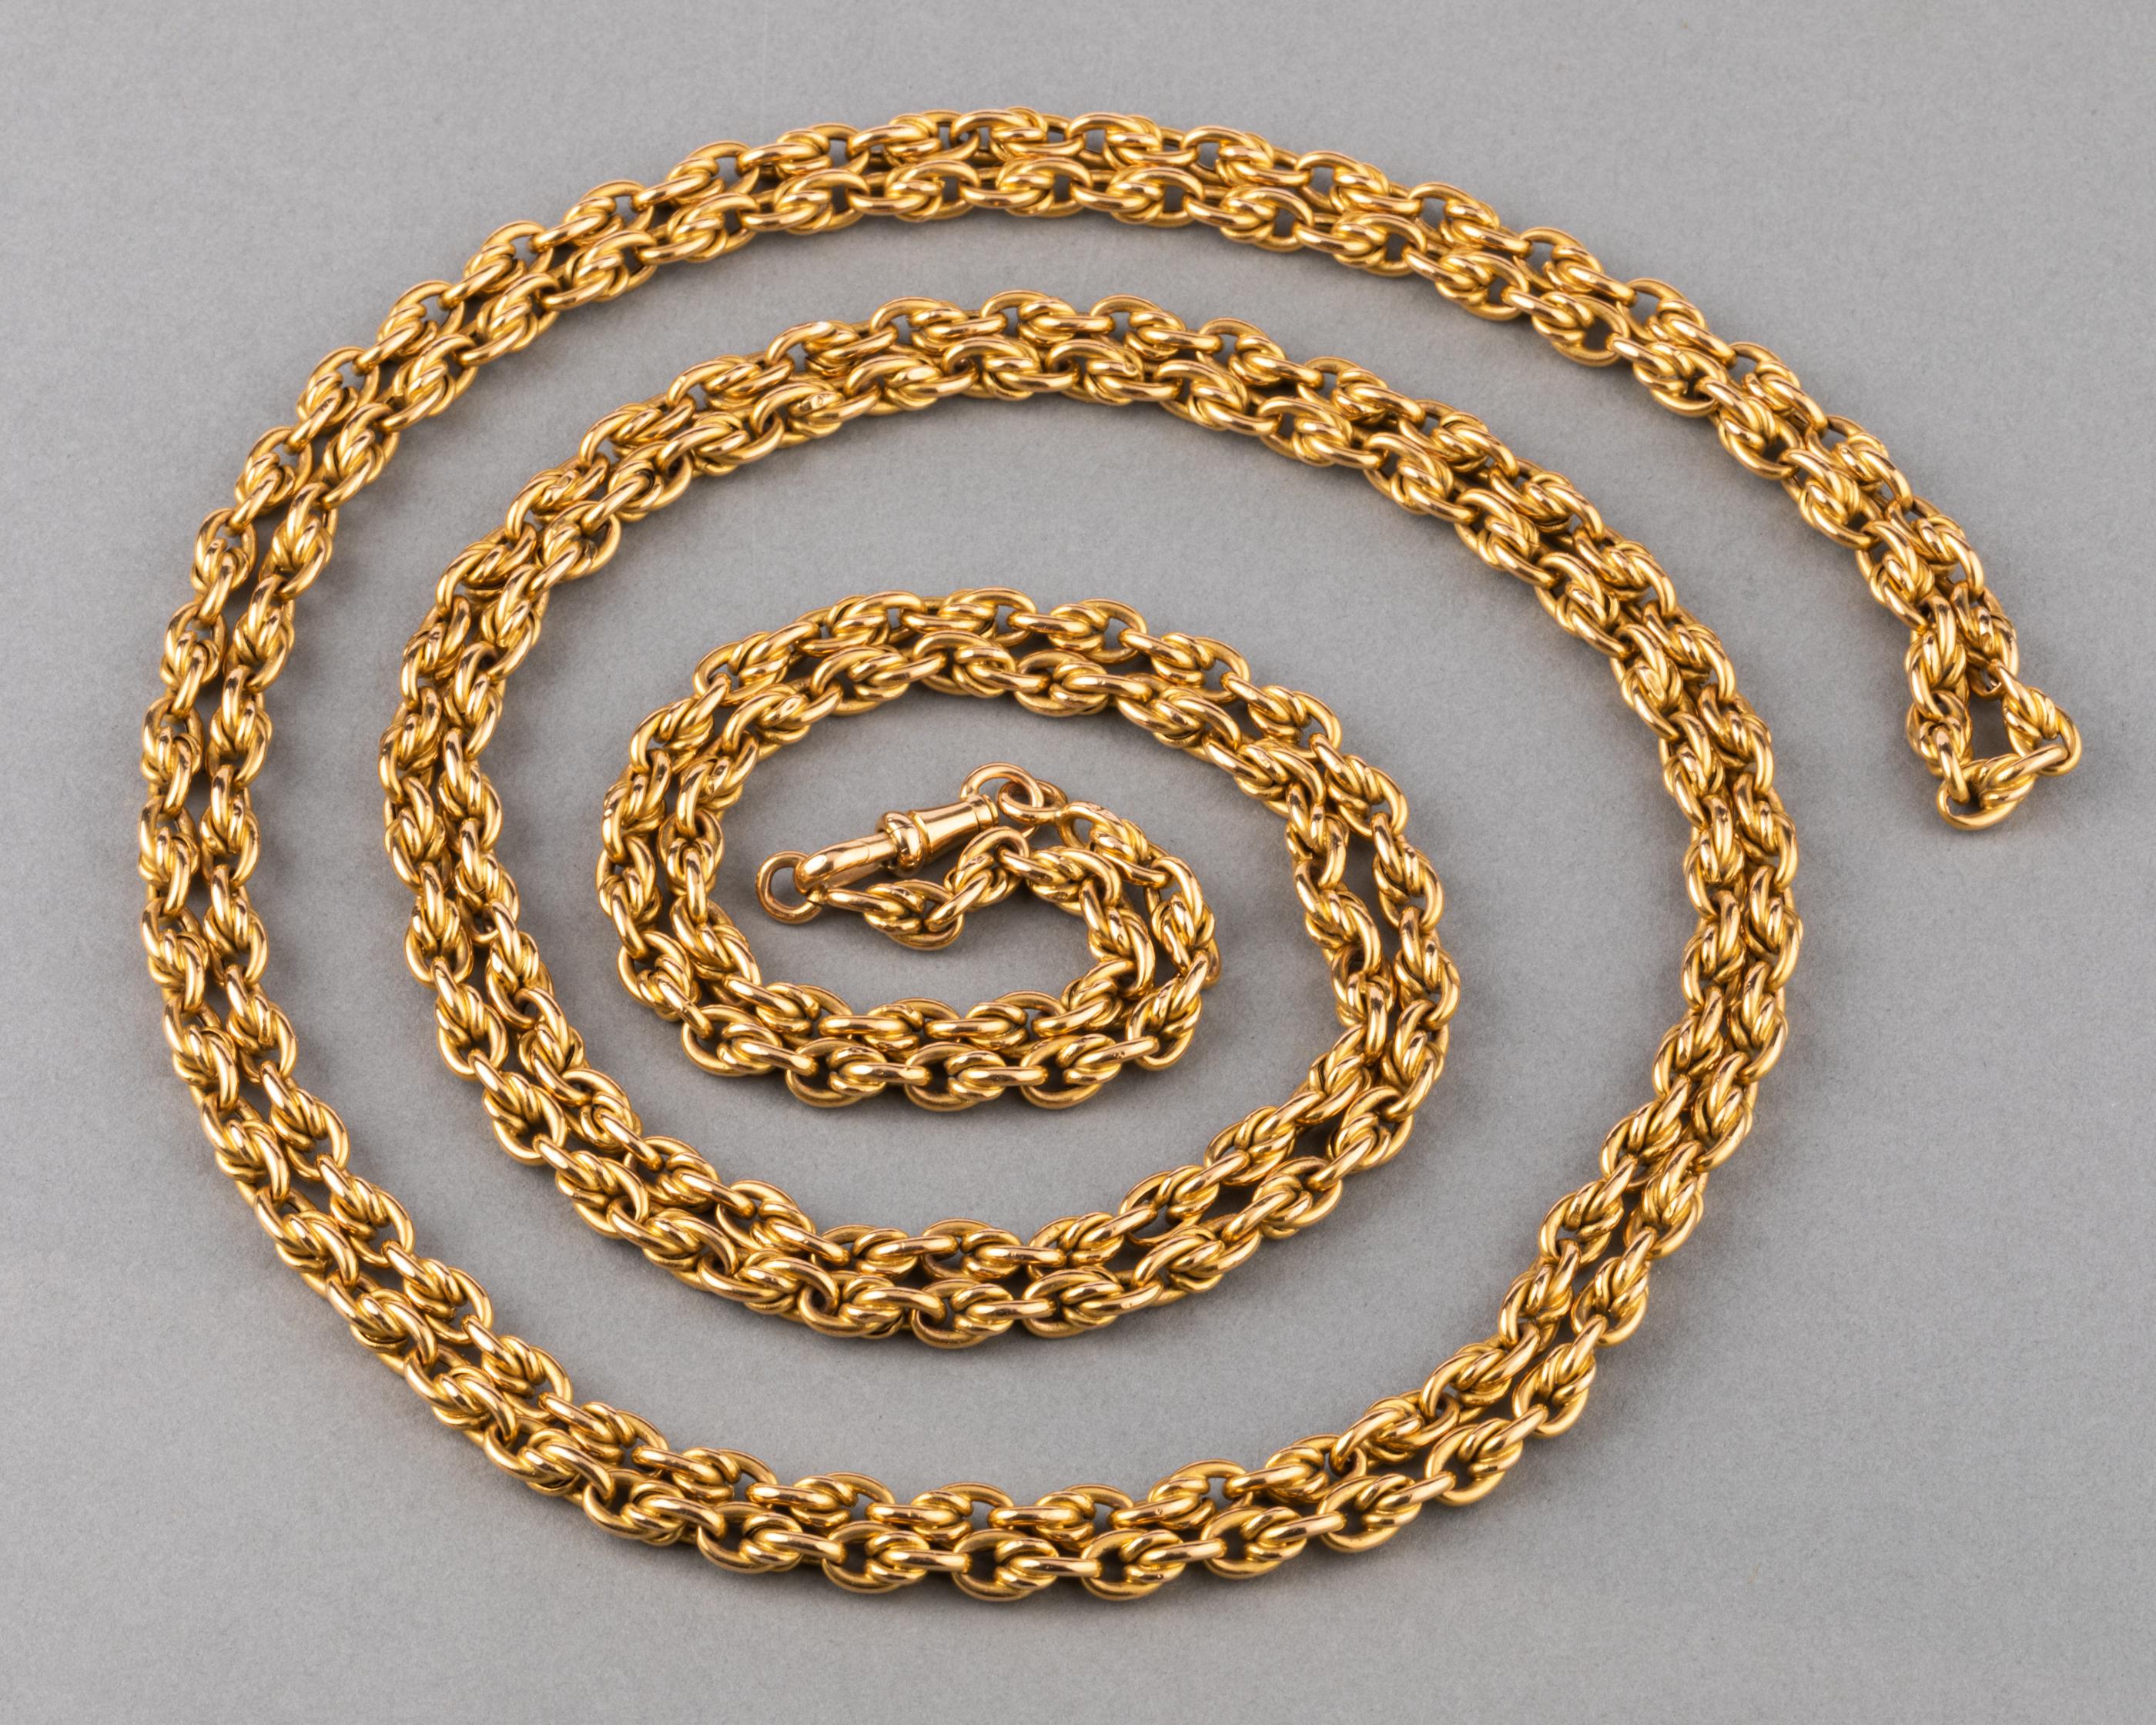 Very beautiful chain, made in France circa 1900.

The chain is long, 160 cm or 64 inches. The weight is 45.8 grams.
Made in yellow gold 18k, multiple marks for gold: the eagle head and Rhinoceros head.
The chain has presence, 4mm thick.
In very good